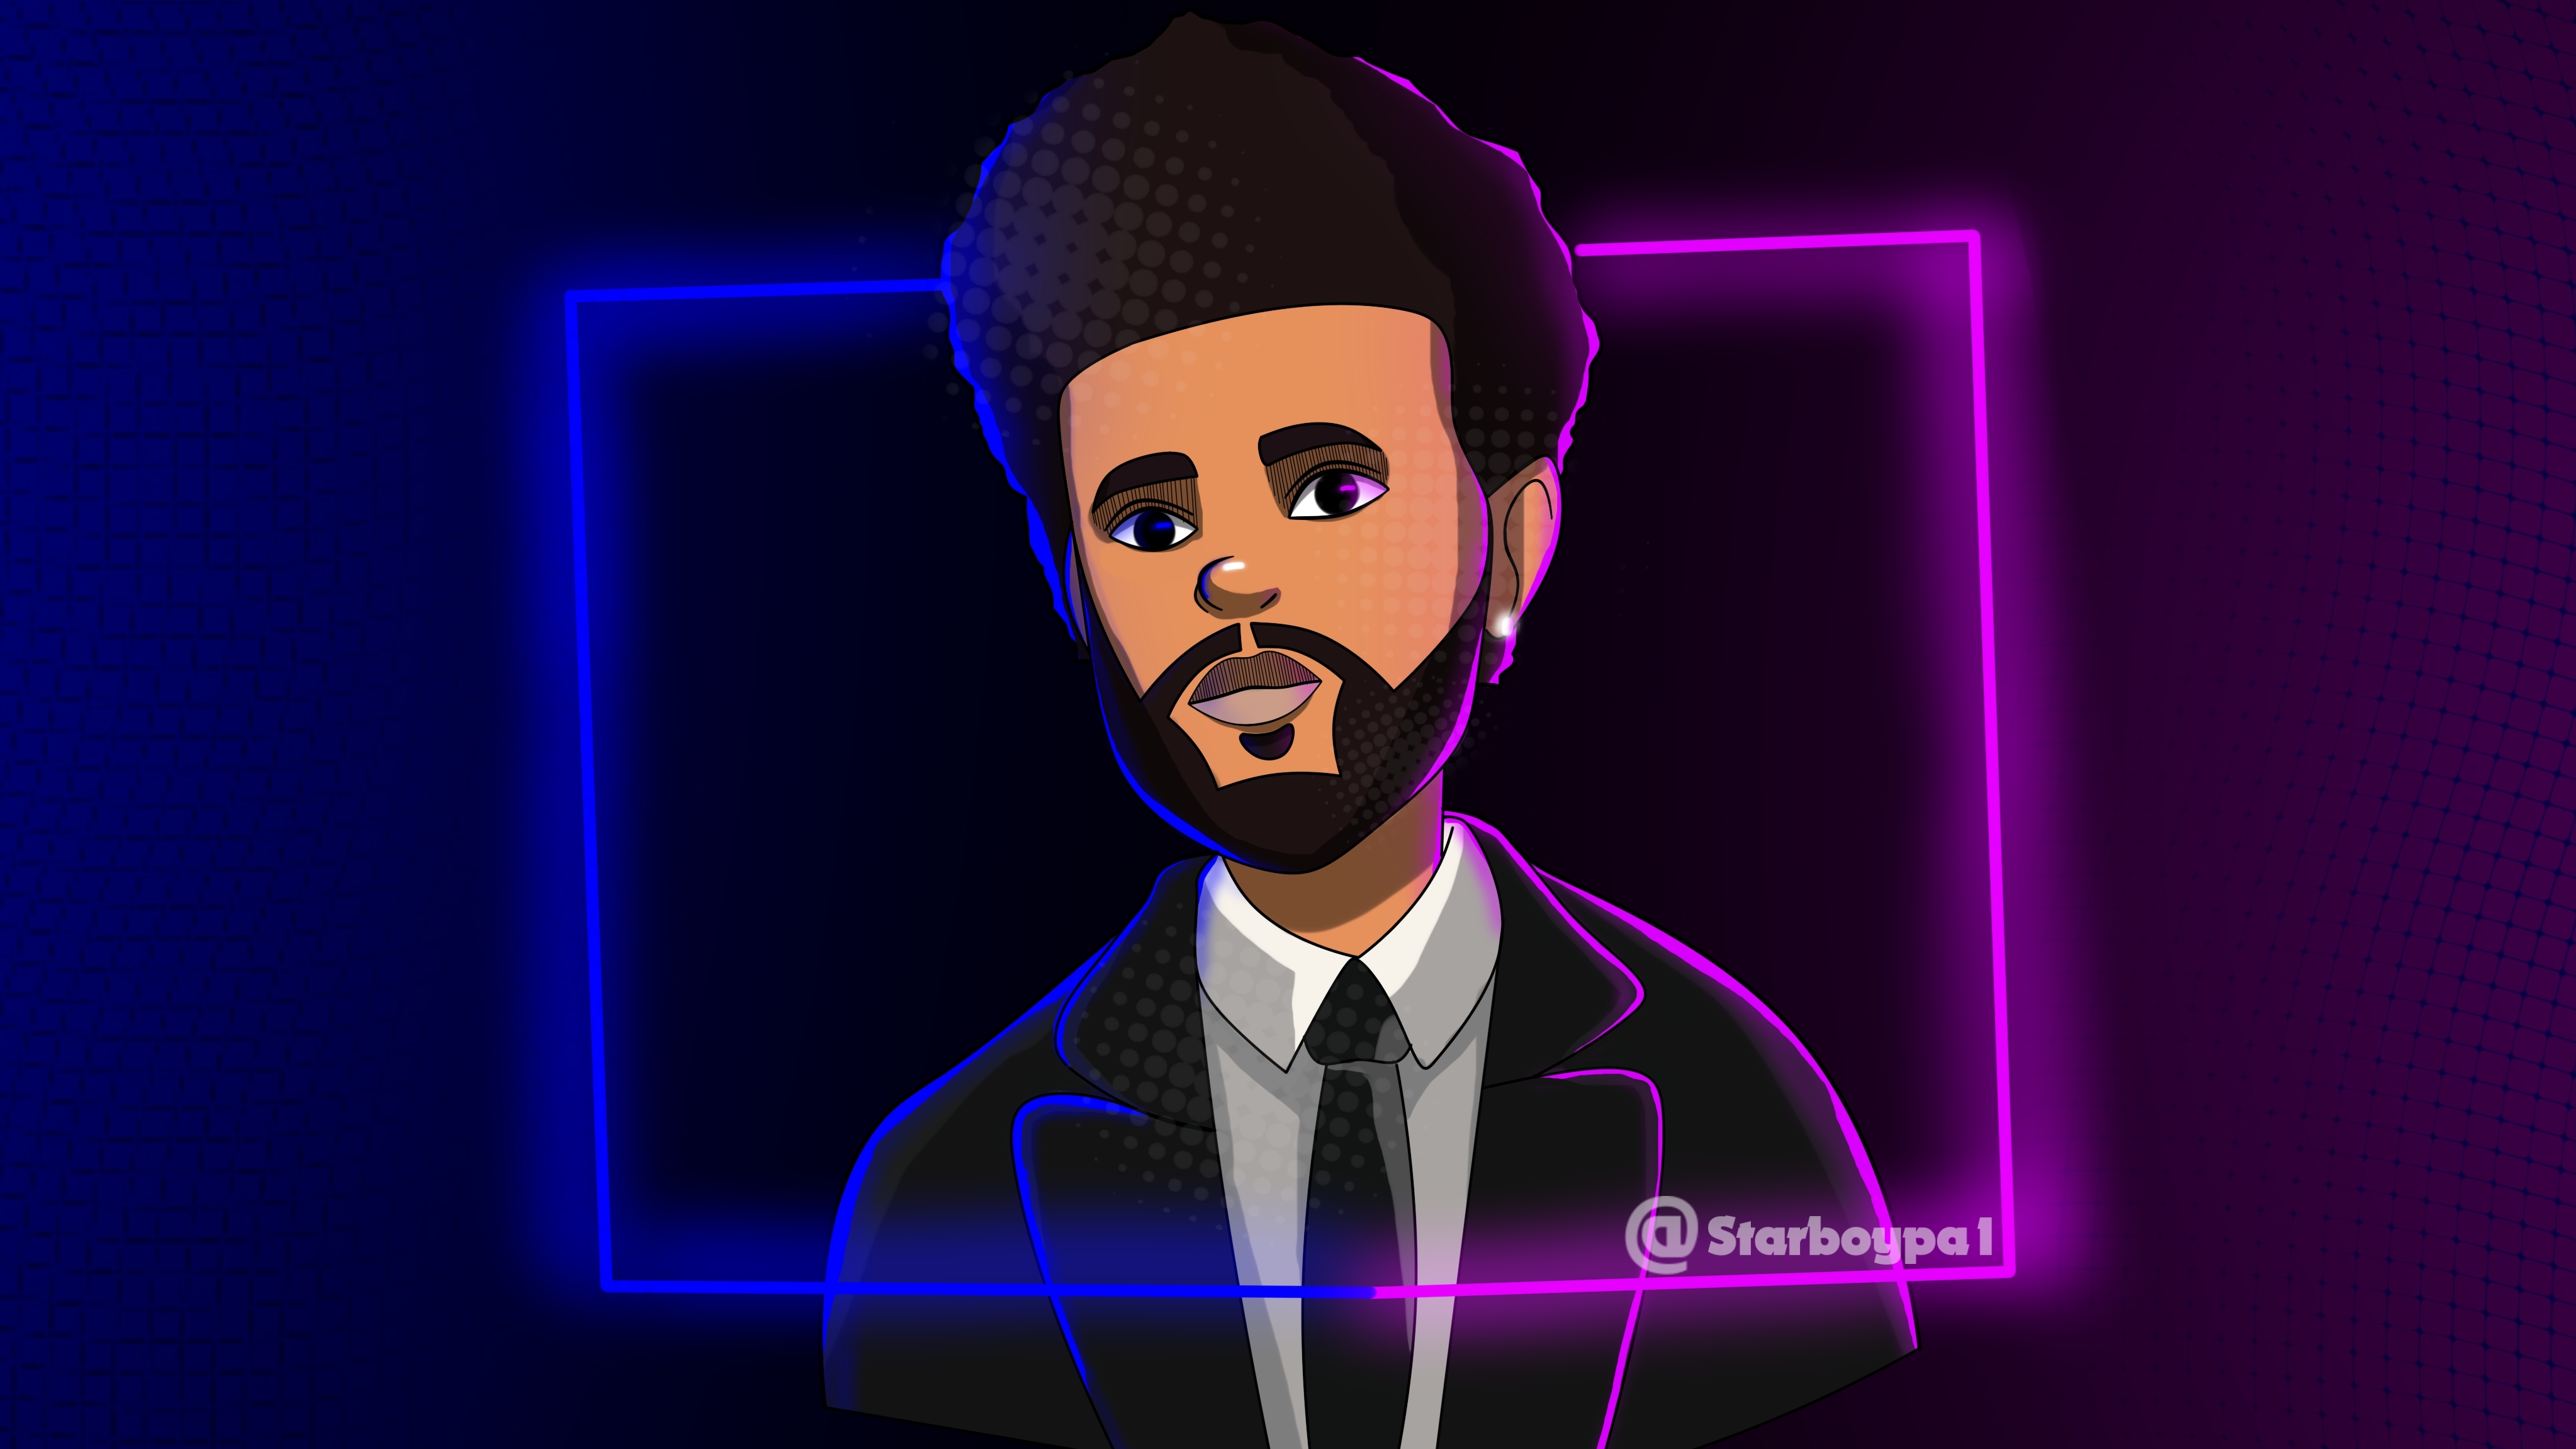 The Weeknd in Cartoon style by starboypa1 on DeviantArt